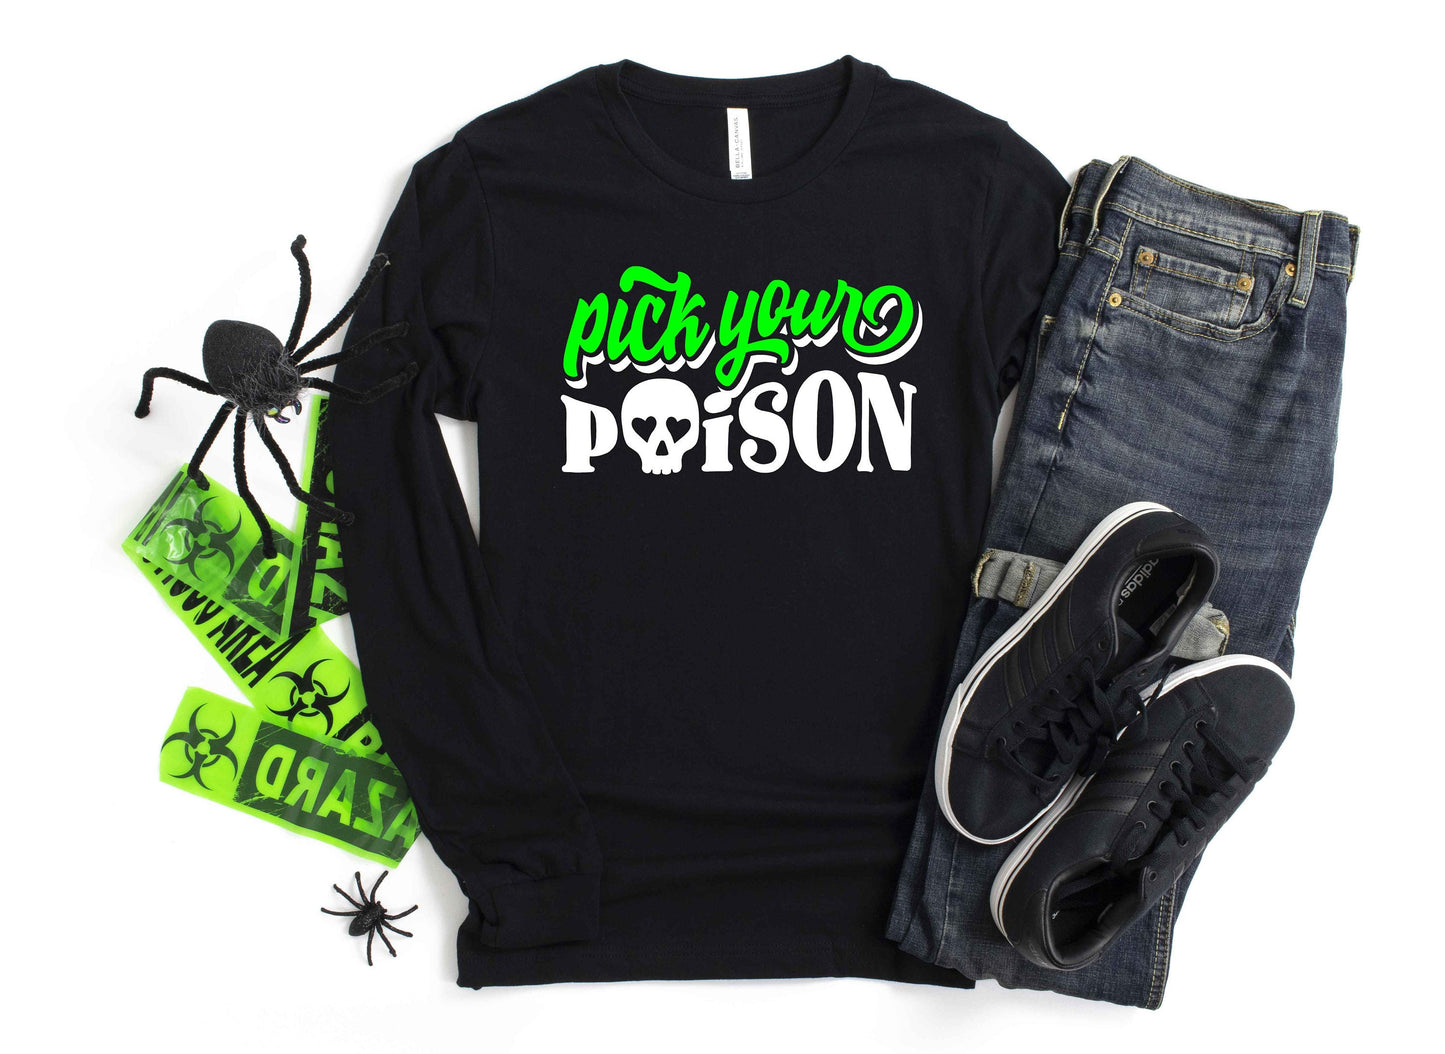 Pick Your Poison Halloween long sleeve t-shirt - halloween shirt - halloween t-shirt